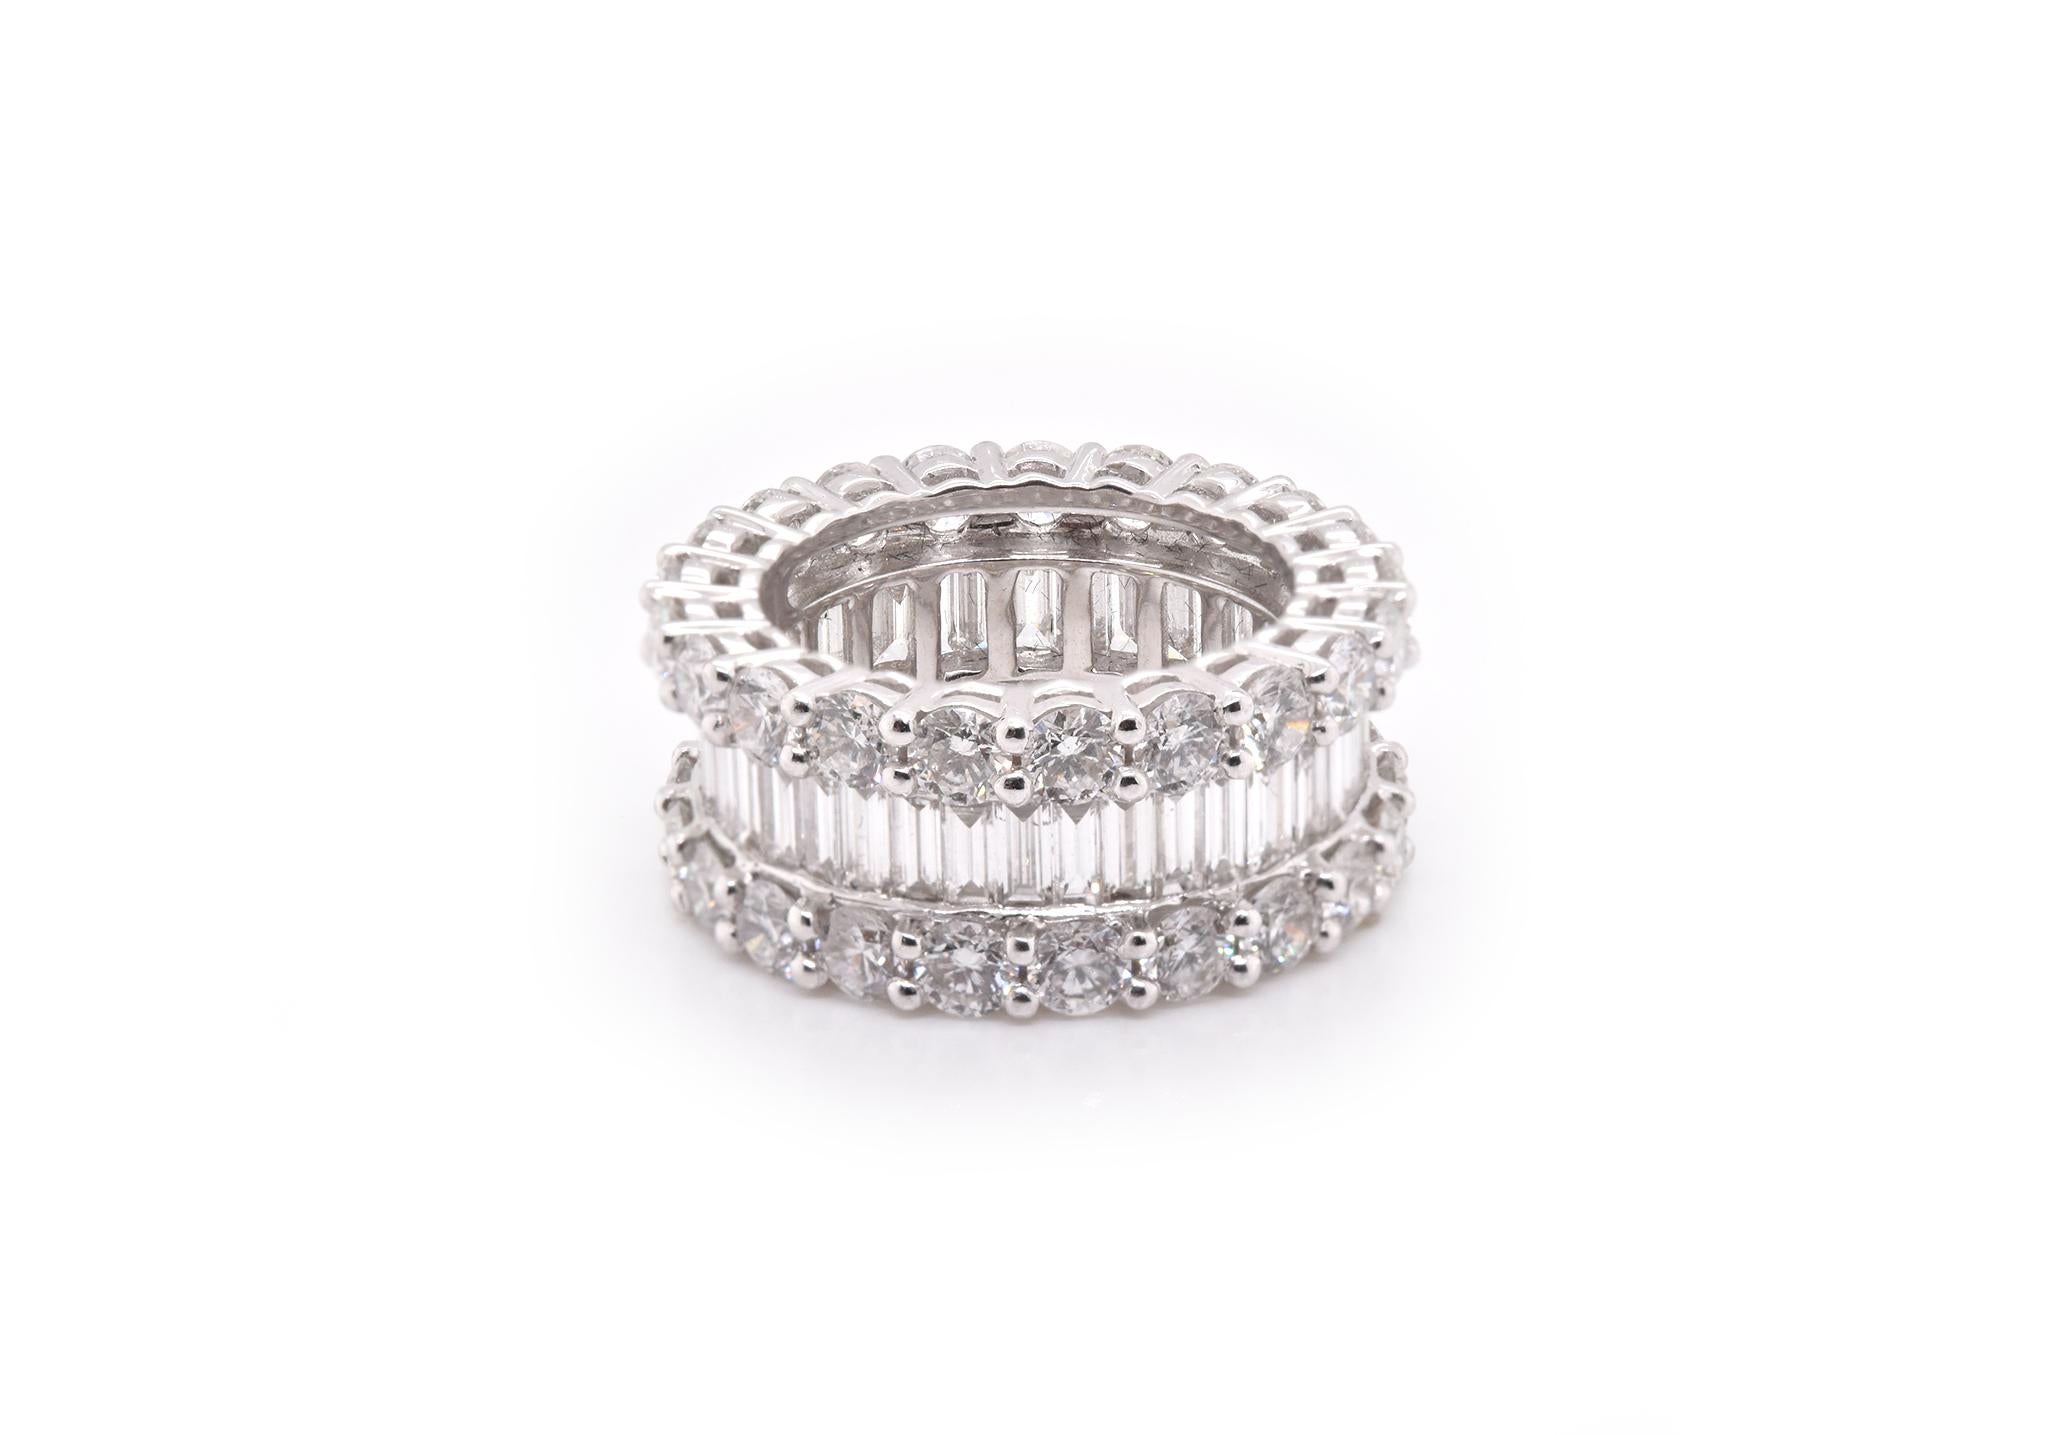 Designer: custom design
Material: 18k white gold
Diamonds:  42 round brilliant cut= 5.78cttw
Color: G
Clarity: VS
Diamonds: 40 baguette cut = 2.77cttw
Color: G 
Clarity: VS
Size: 6.5 please allow two additional shipping days for sizing